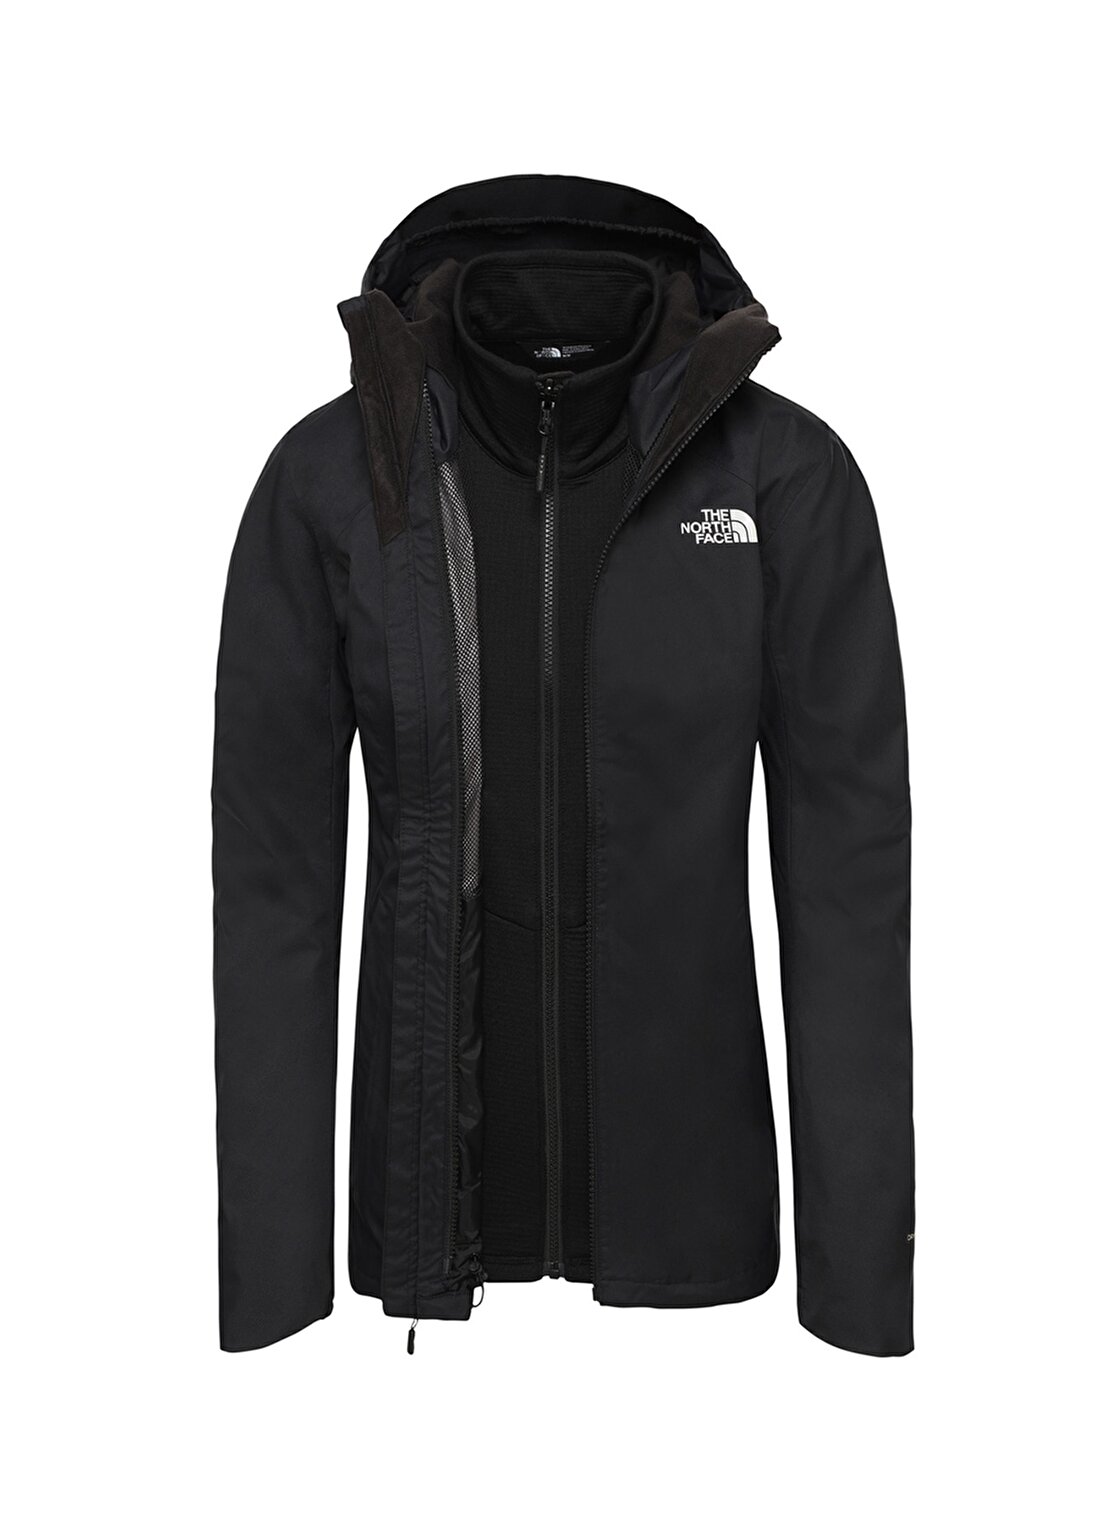 The North Face Siyah Dryvent Mont